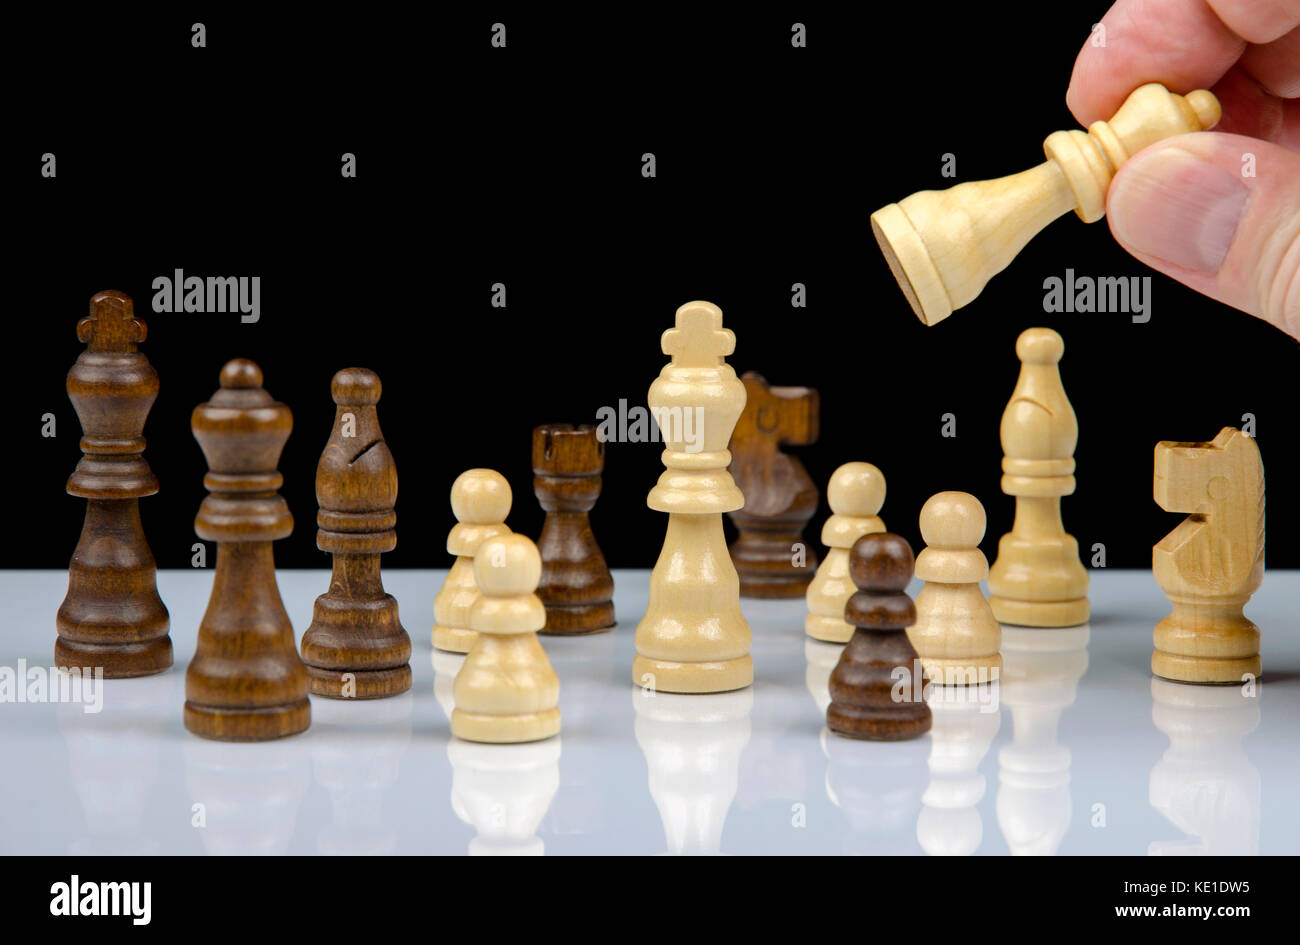 Close-up view of chess pieces with reflection on white background with hand holding queen isolated on black background Stock Photo